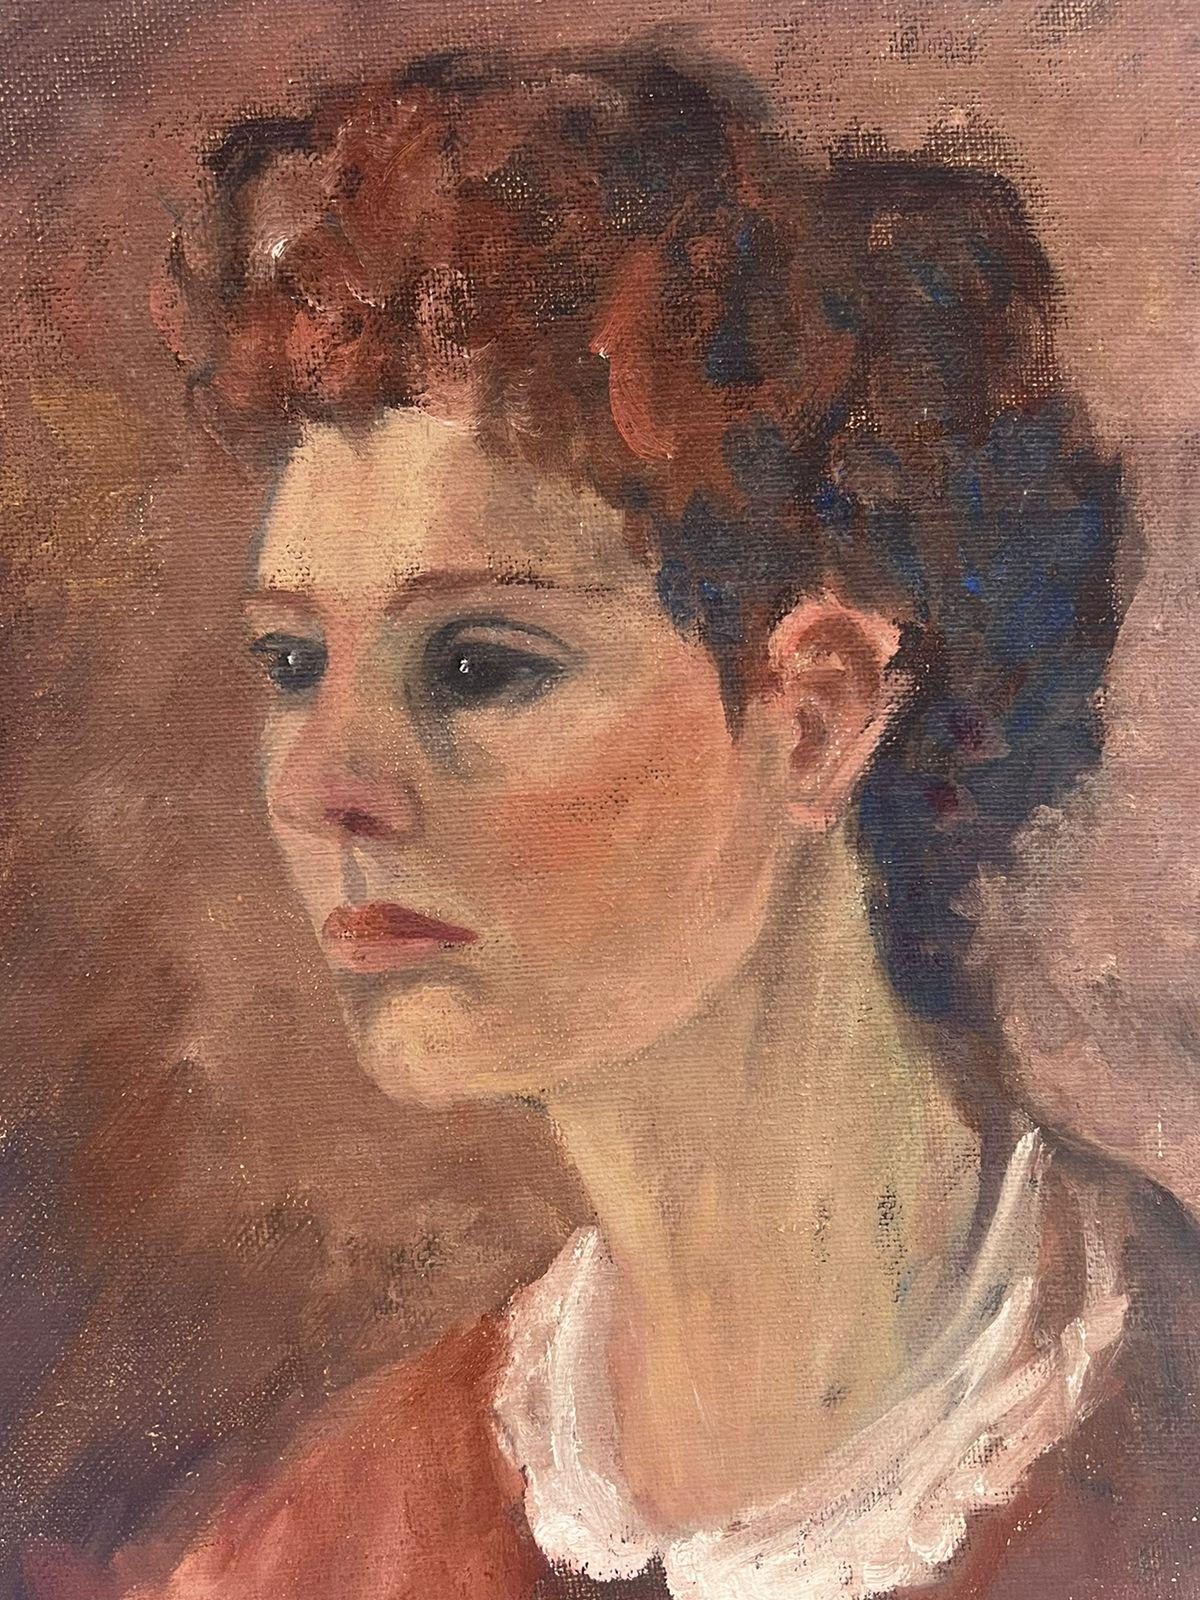 Portrait of a Lady
by Geza Somerset-Paddon (British 20th century)
inscribed and dated verso (1978)
oil painting on board, unframed
board: 18 x 14 inches
inscribed verso
condition: overall very good
provenance: all the paintings we have by this